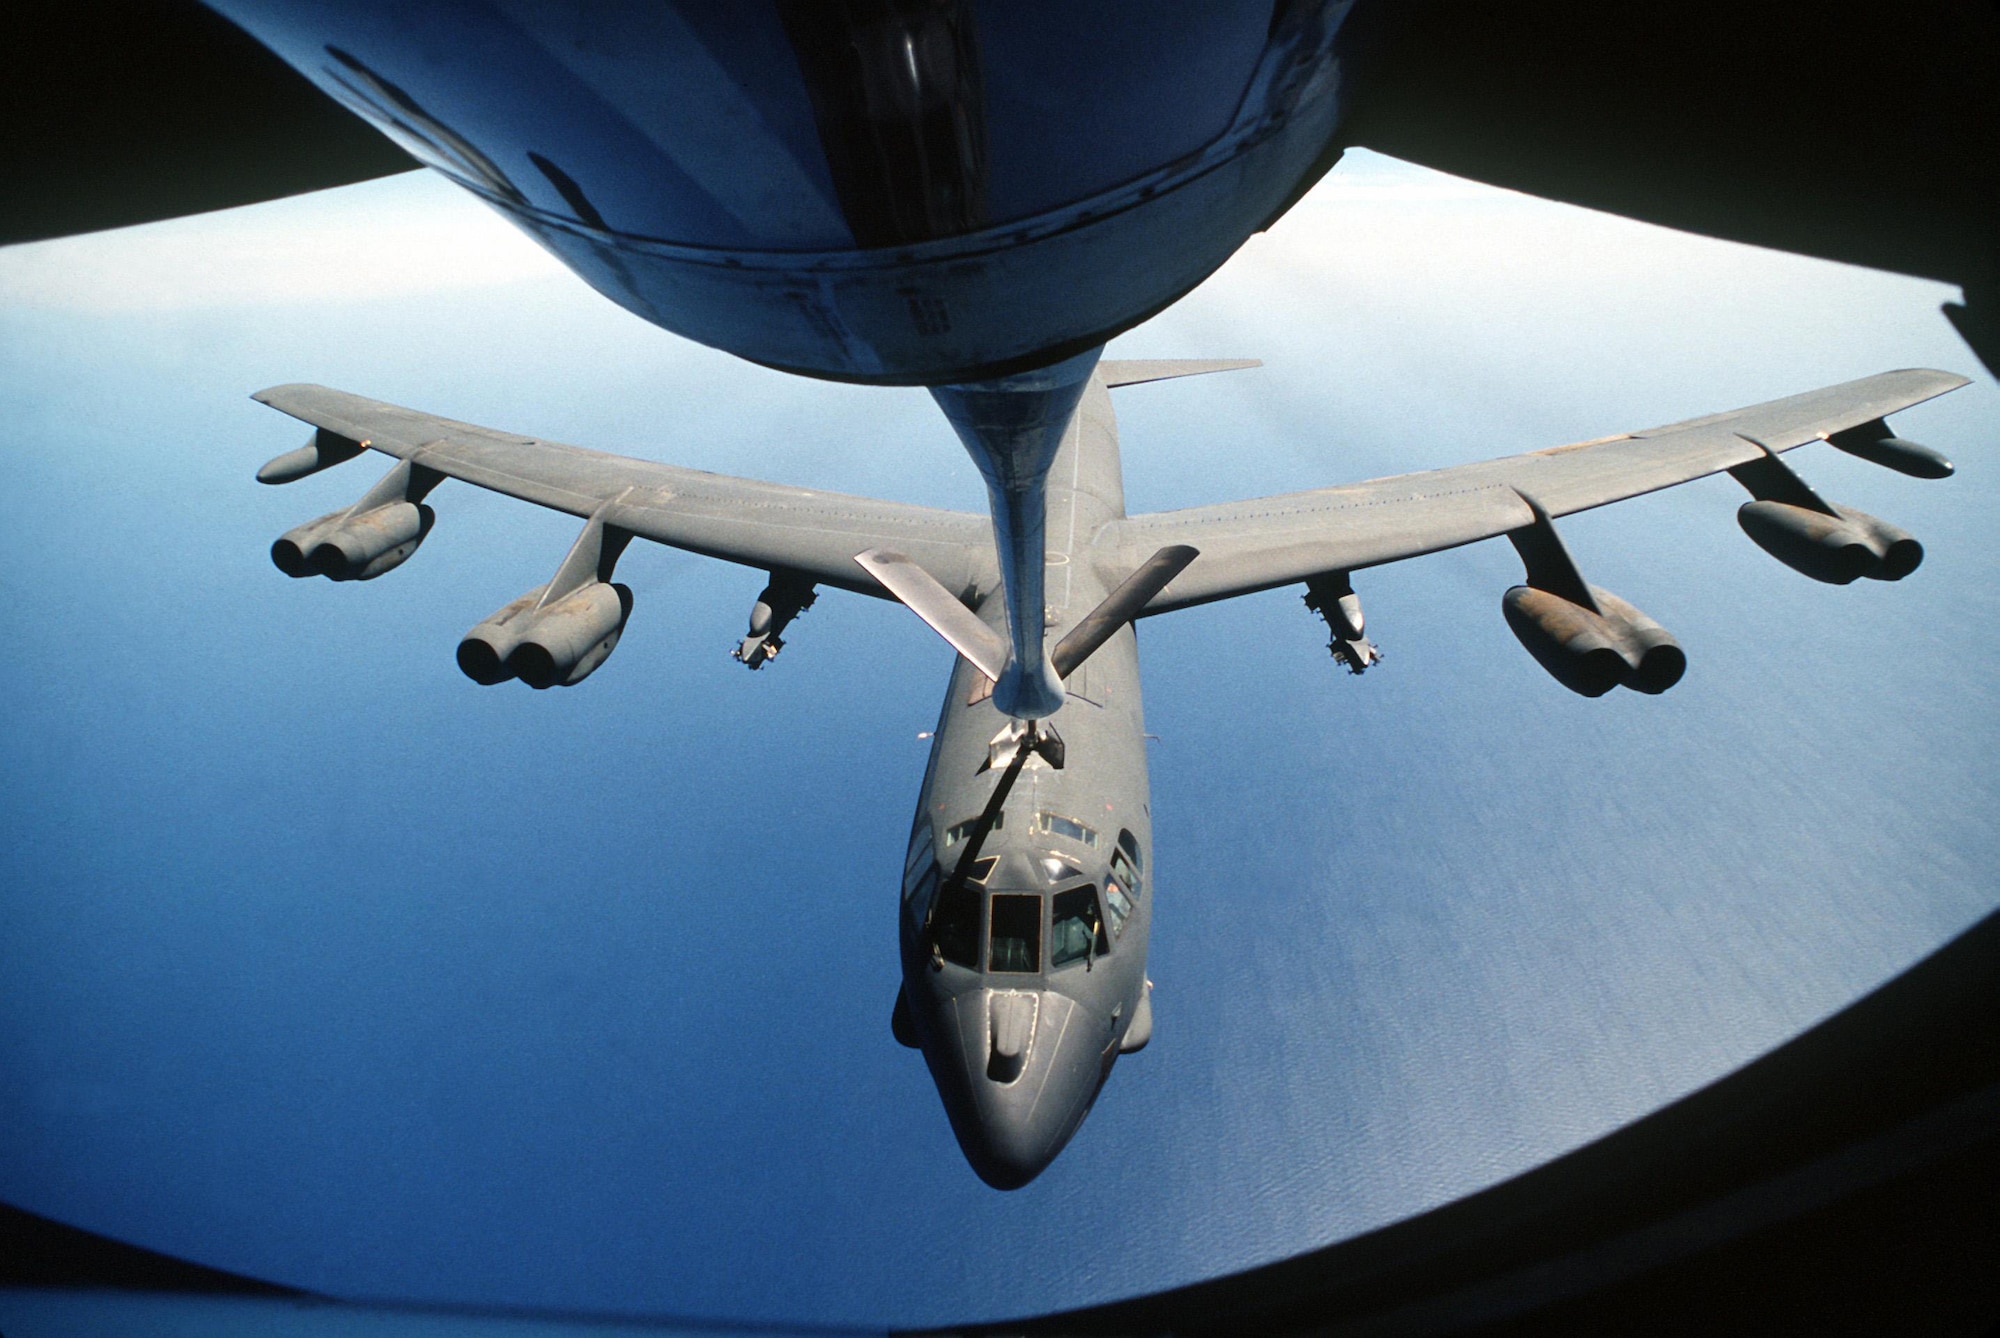 A KC-135 Stratotanker aircraft boom operator refuels a B-52 Stratofortress aircraft, center, during air operations for Operation Desert Storm over Southwest Asia Feb. 1, 1991. (U.S. Air Force photo by Senior Airman Chris Putnam/Released)